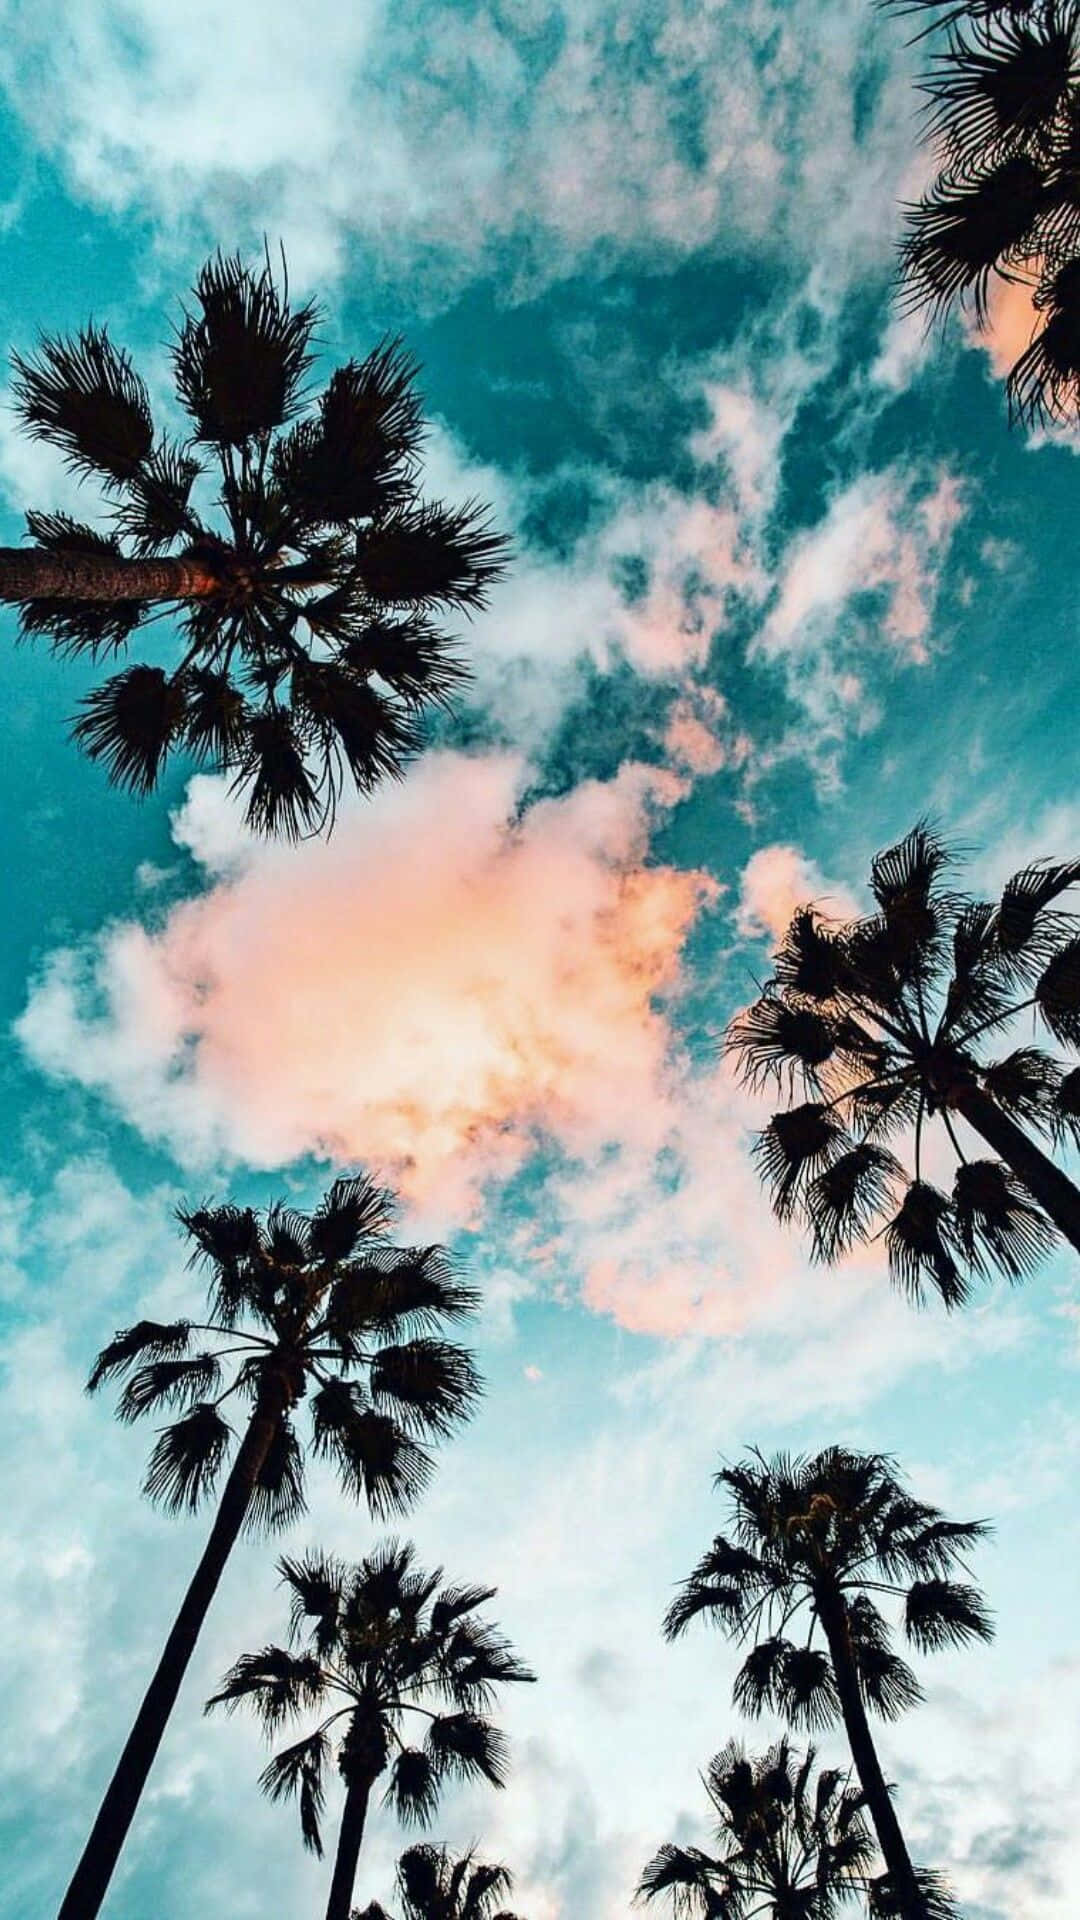 A group of palm trees with clouds in the background - Palm tree